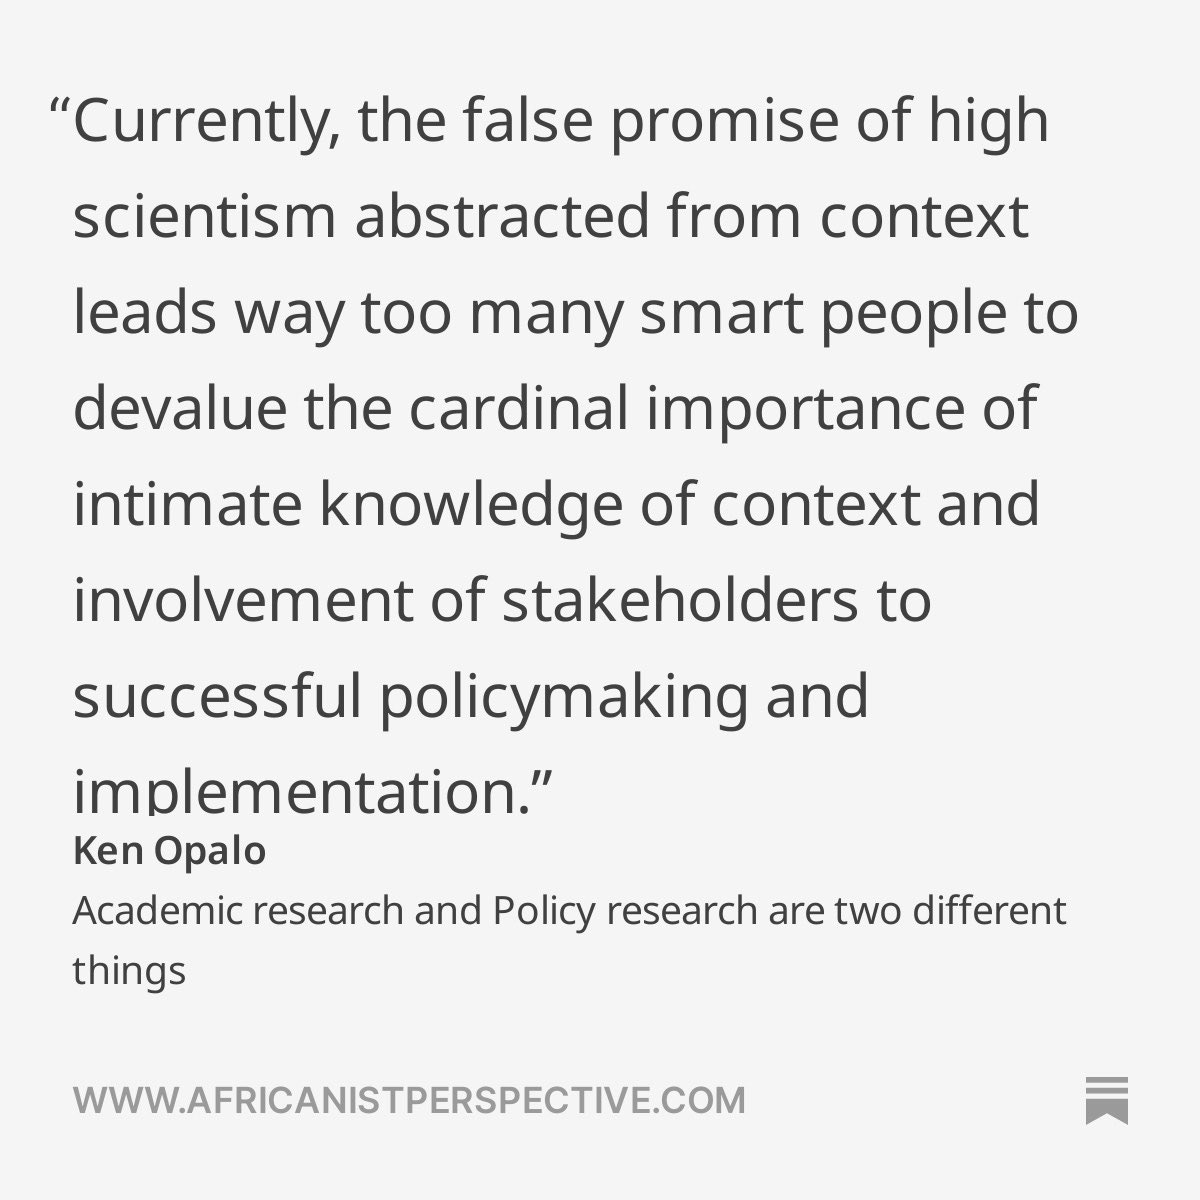 This piece is so good: How academic incentives around “evidence based policy” are misaligned with the demands of policymaking in complex settings—and more. So many insights here, including why the political economy of implementation matters but is often underemphasized.